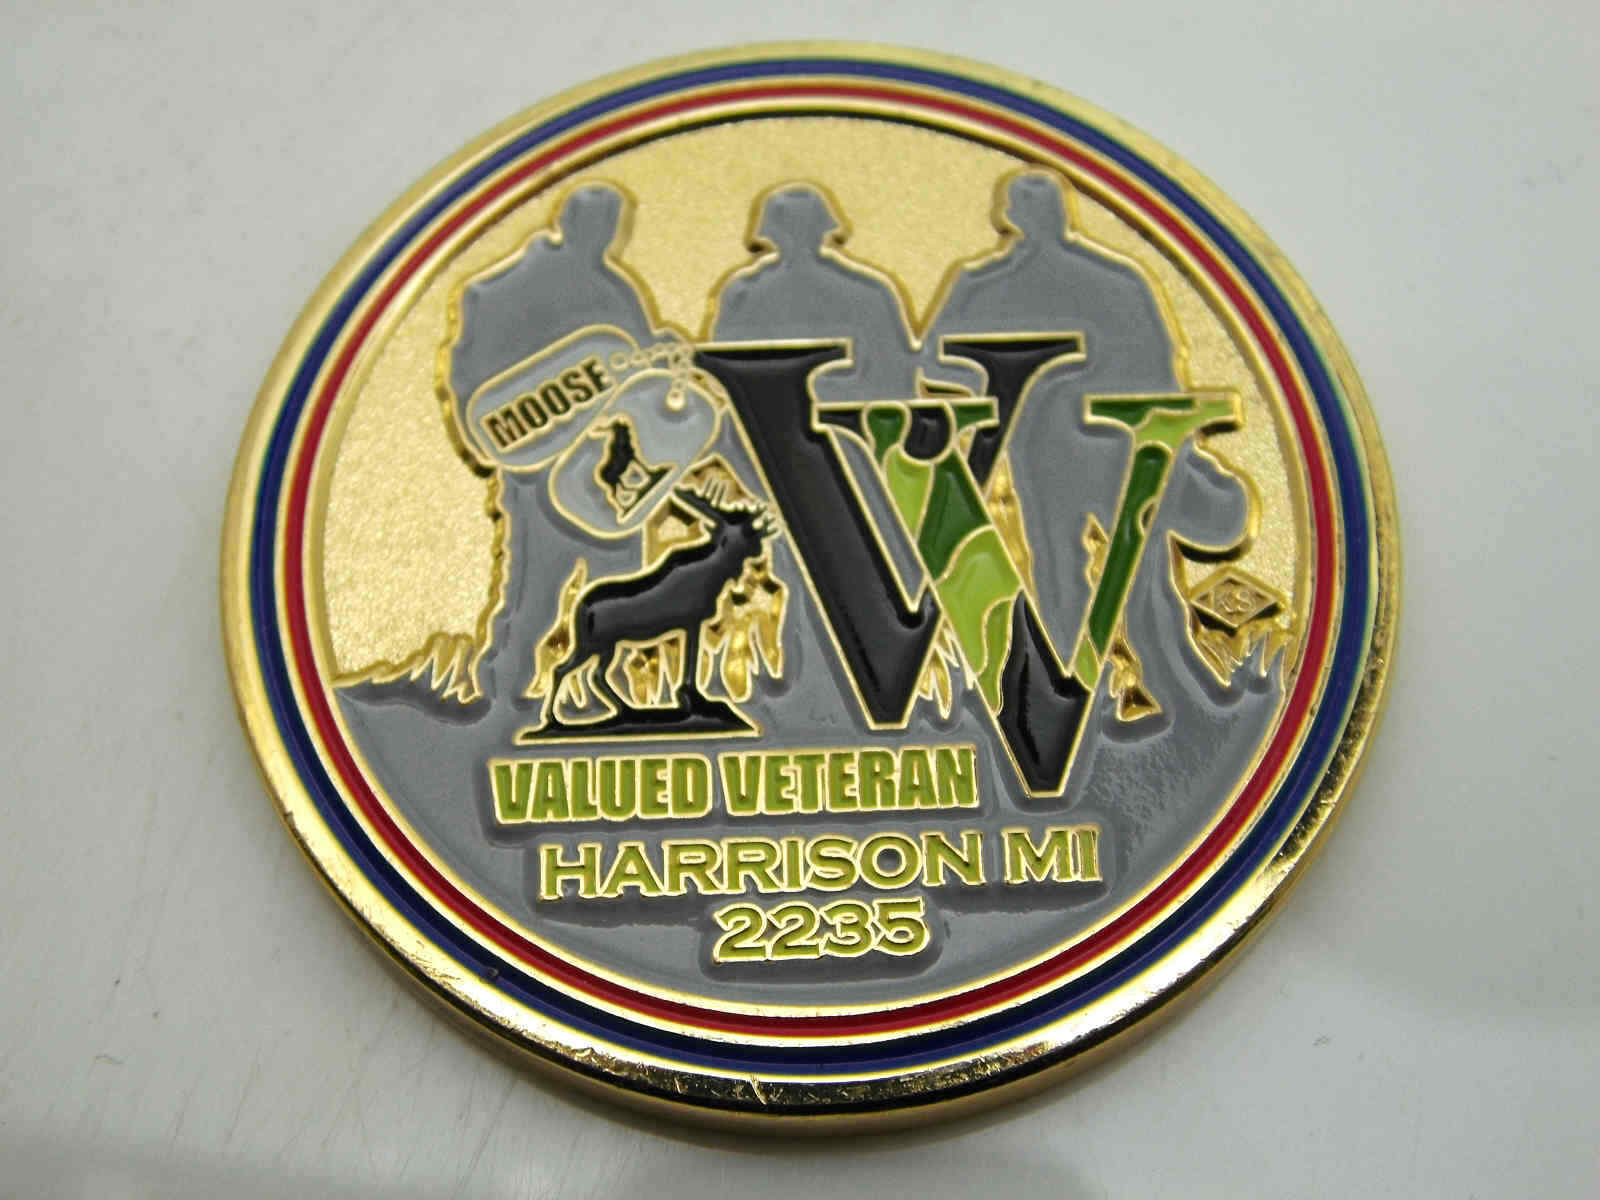 THE LOYAL ORDER OF THE MOOSE SYANDS BEHIND OUR VETERANS CHALLENGE COIN